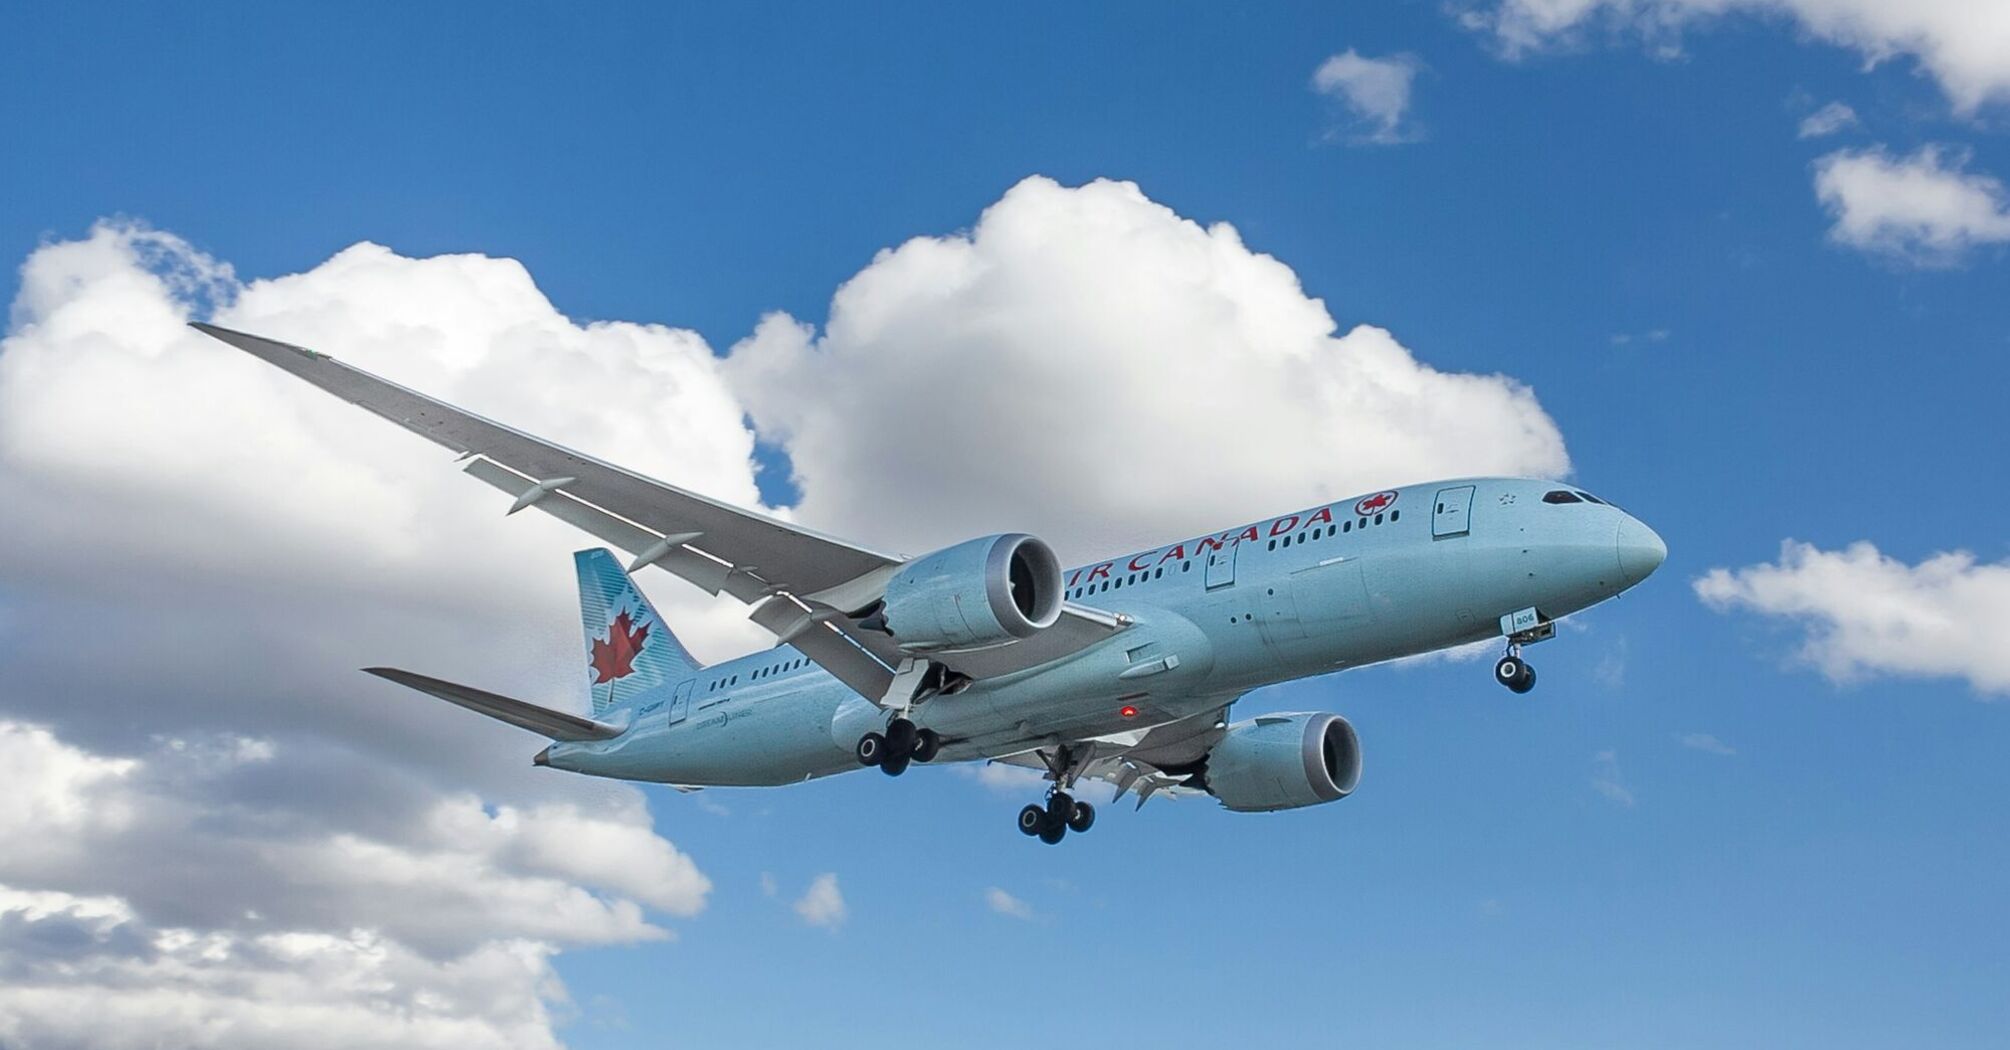 Air Canada airplane in flight with Olympic-themed livery